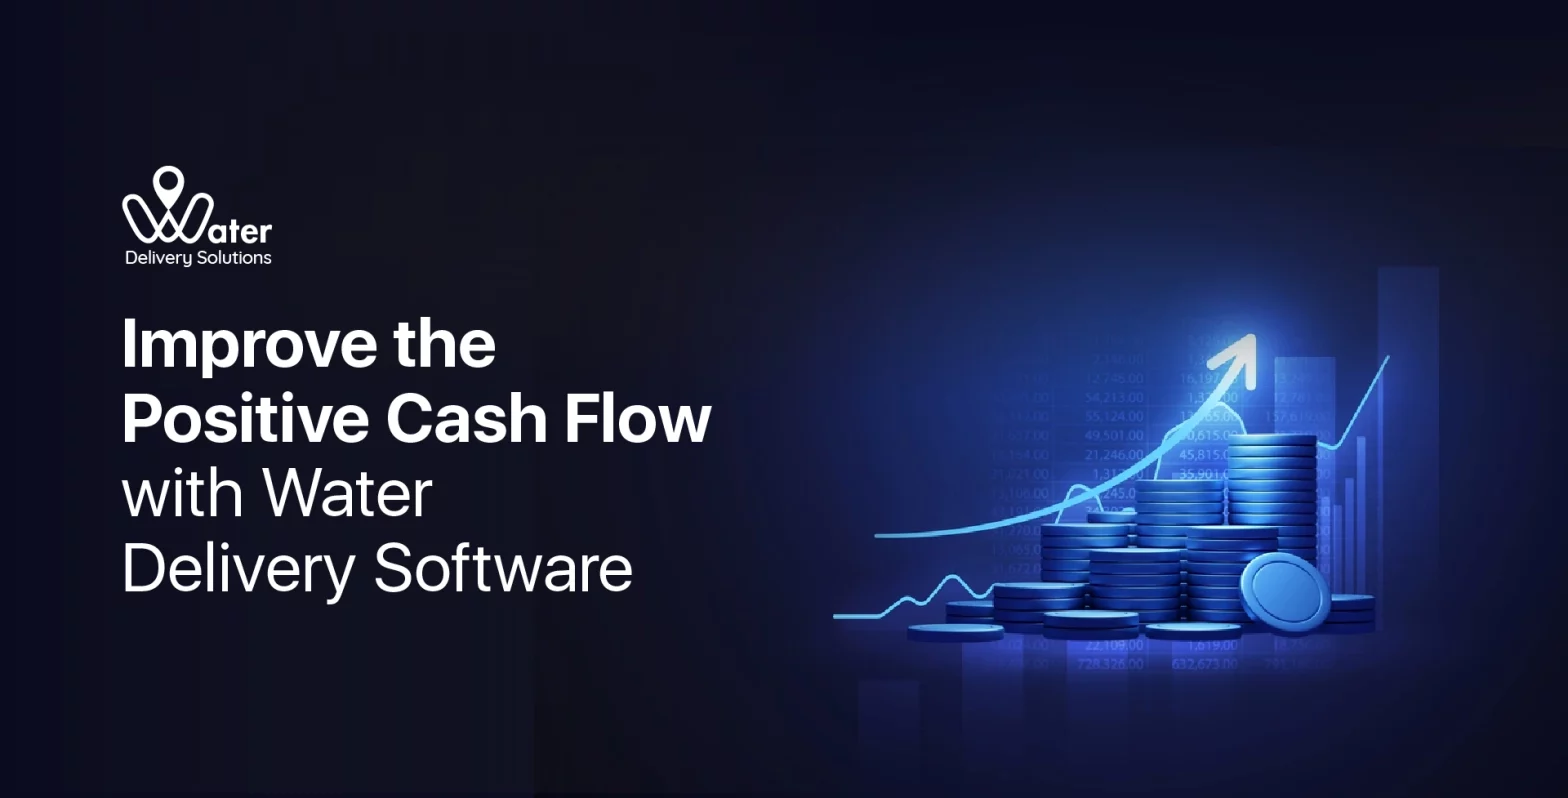 wds-founded-by-ravi-garg-website-insights-improve-the-positive-cash-flow-with-water-delivery-software